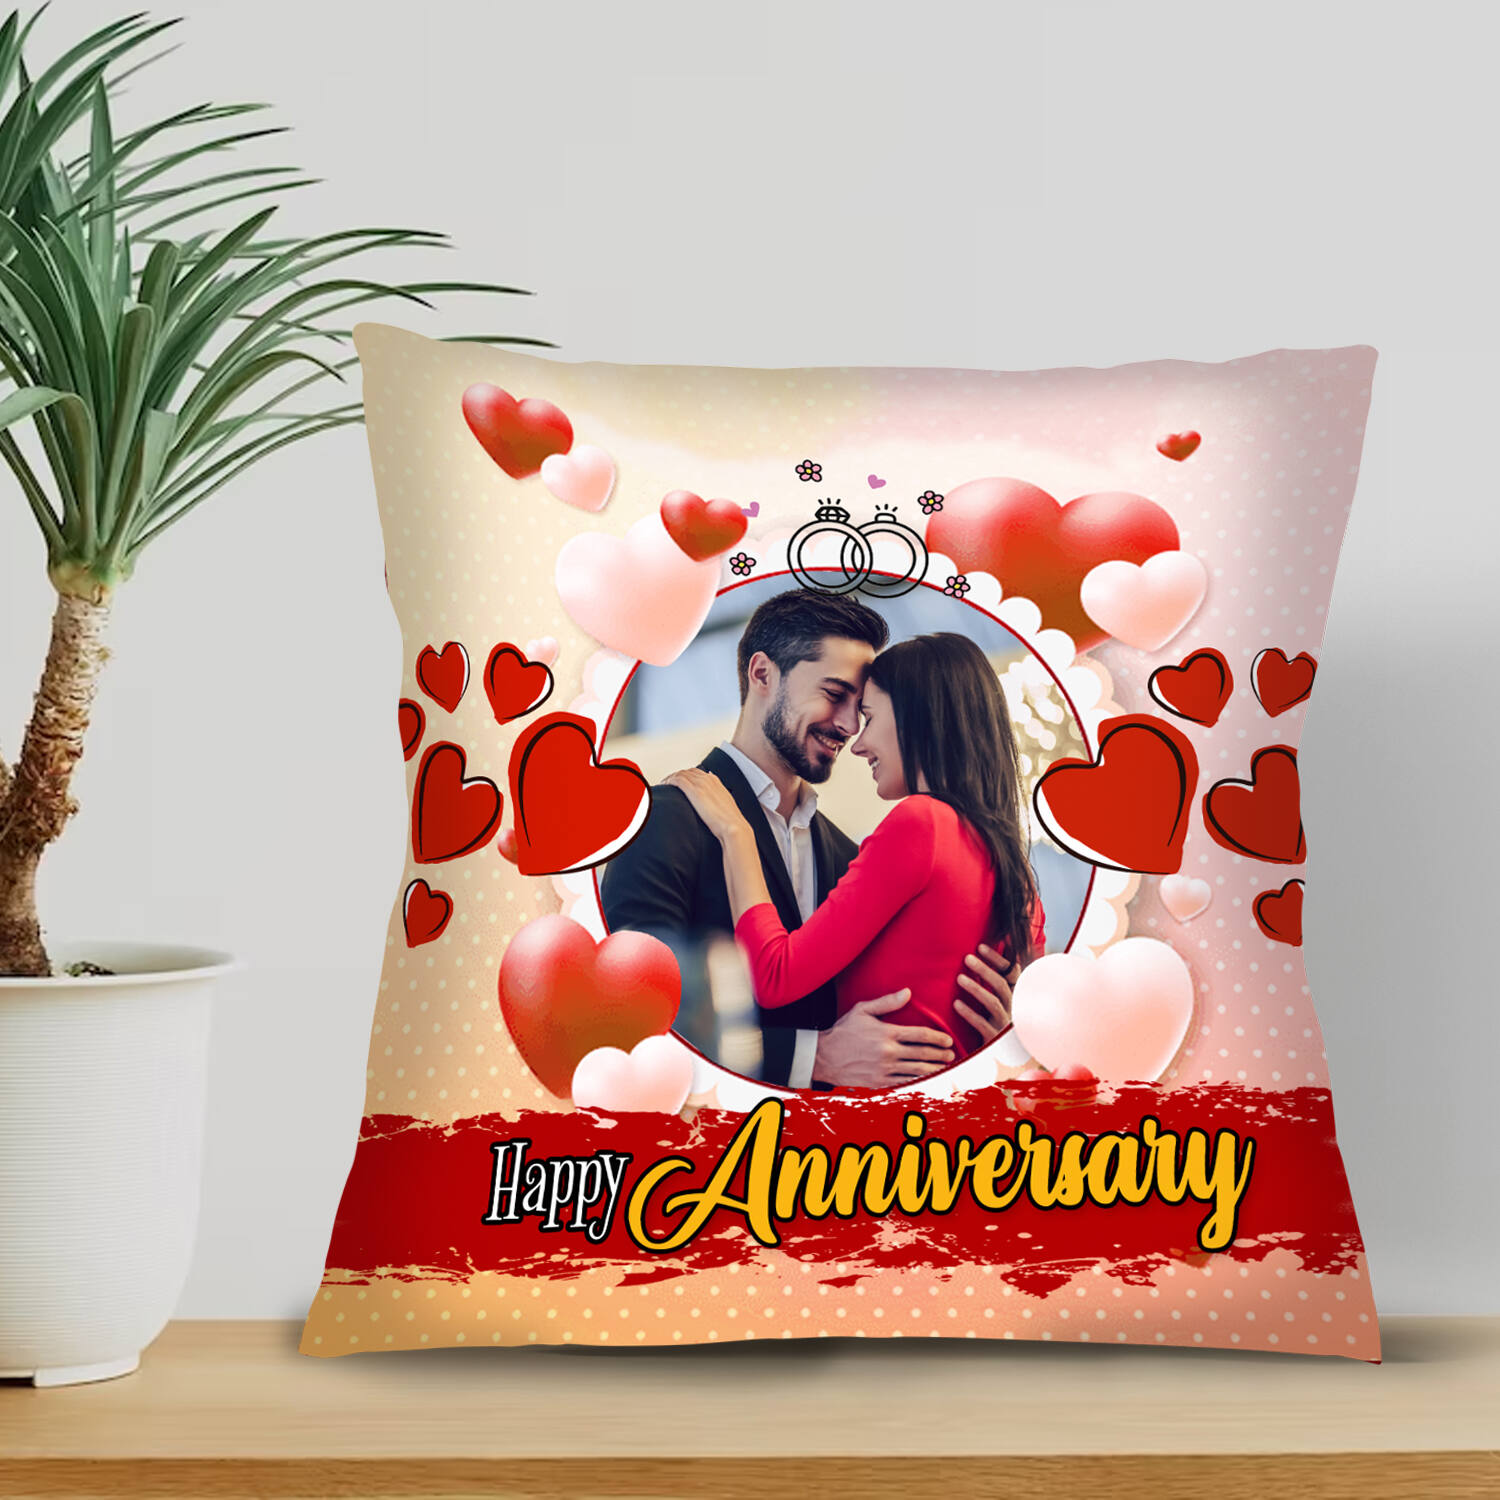 Send Marriage Anniversary Gifts for Parents | Winni.in